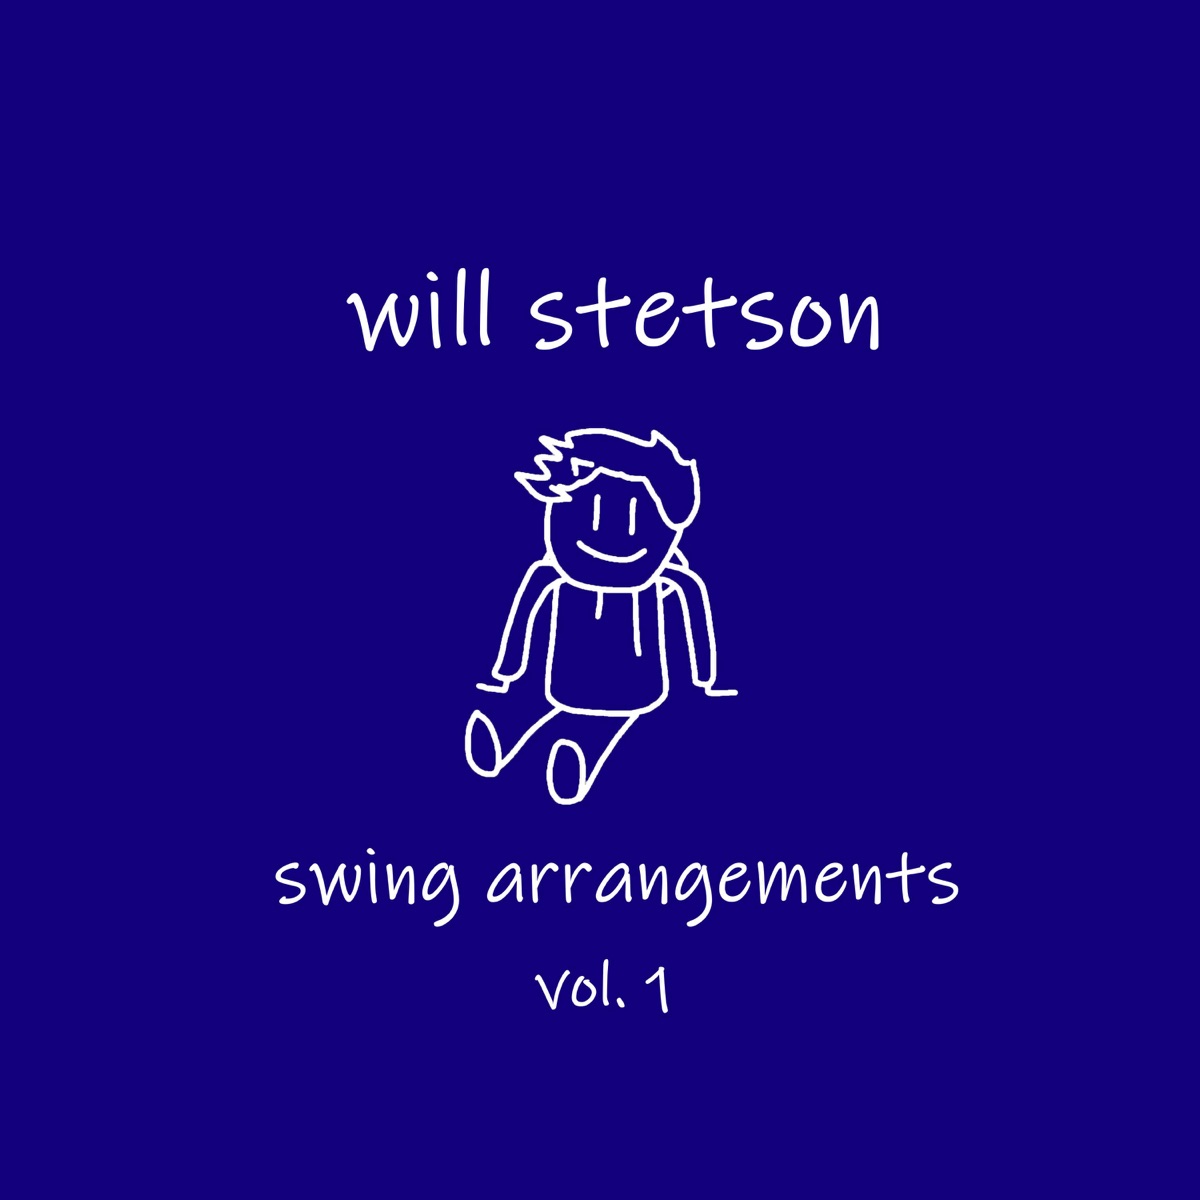 Chainsaw Heart - Album by Will Stetson - Apple Music